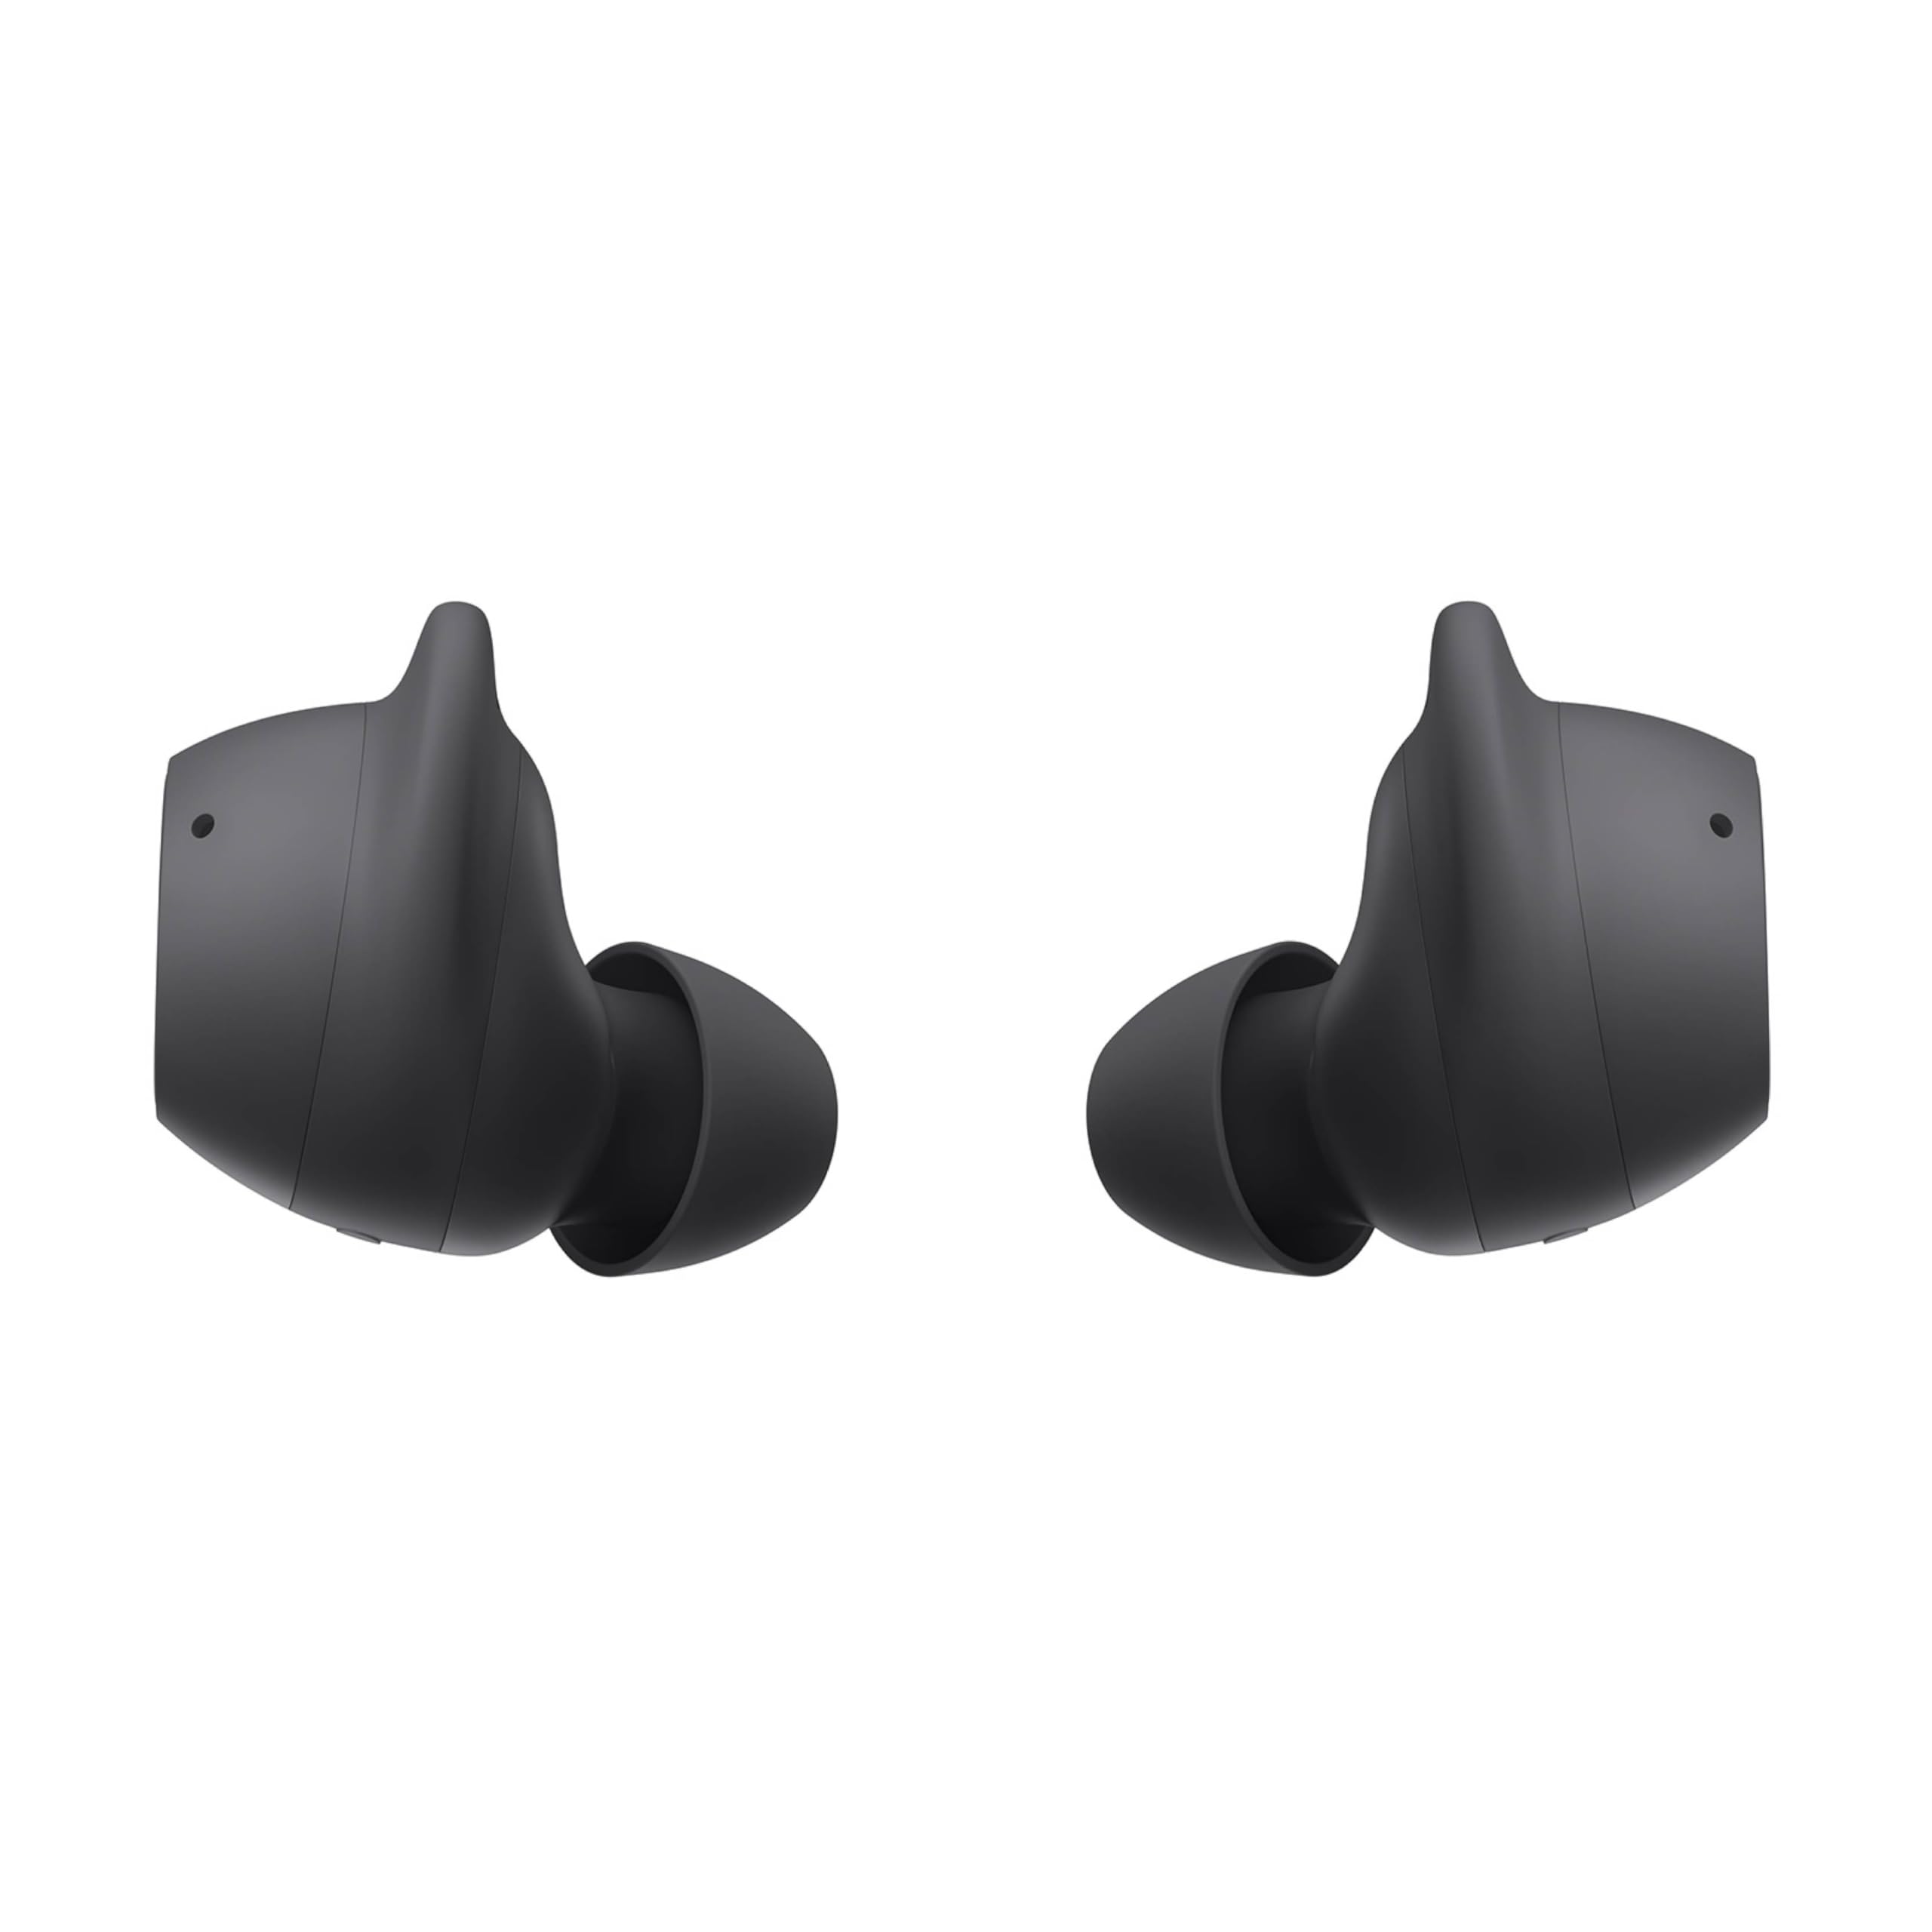 SAMSUNG Galaxy Buds FE, Comfort and Secure Fit, Wing-Tip Design, ANC Support, Ecosystem Connectivity, True Wireless Bluetooth Earbuds, Powerful 1-Way Speaker, US Version, SM-R400NZAAXAR, Graphite